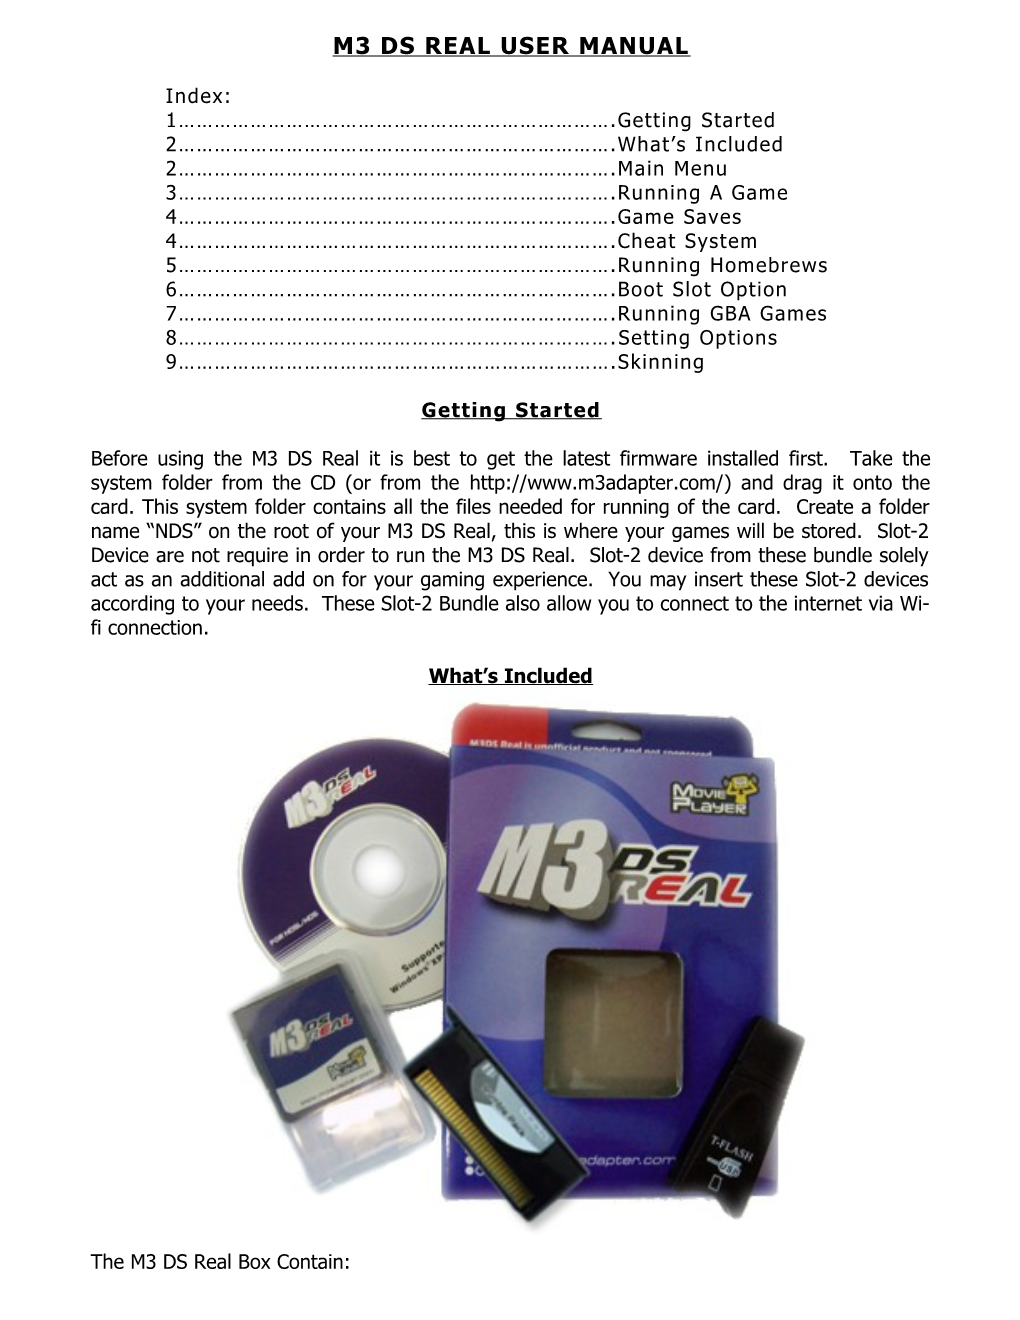 M3 Ds Real User Manual